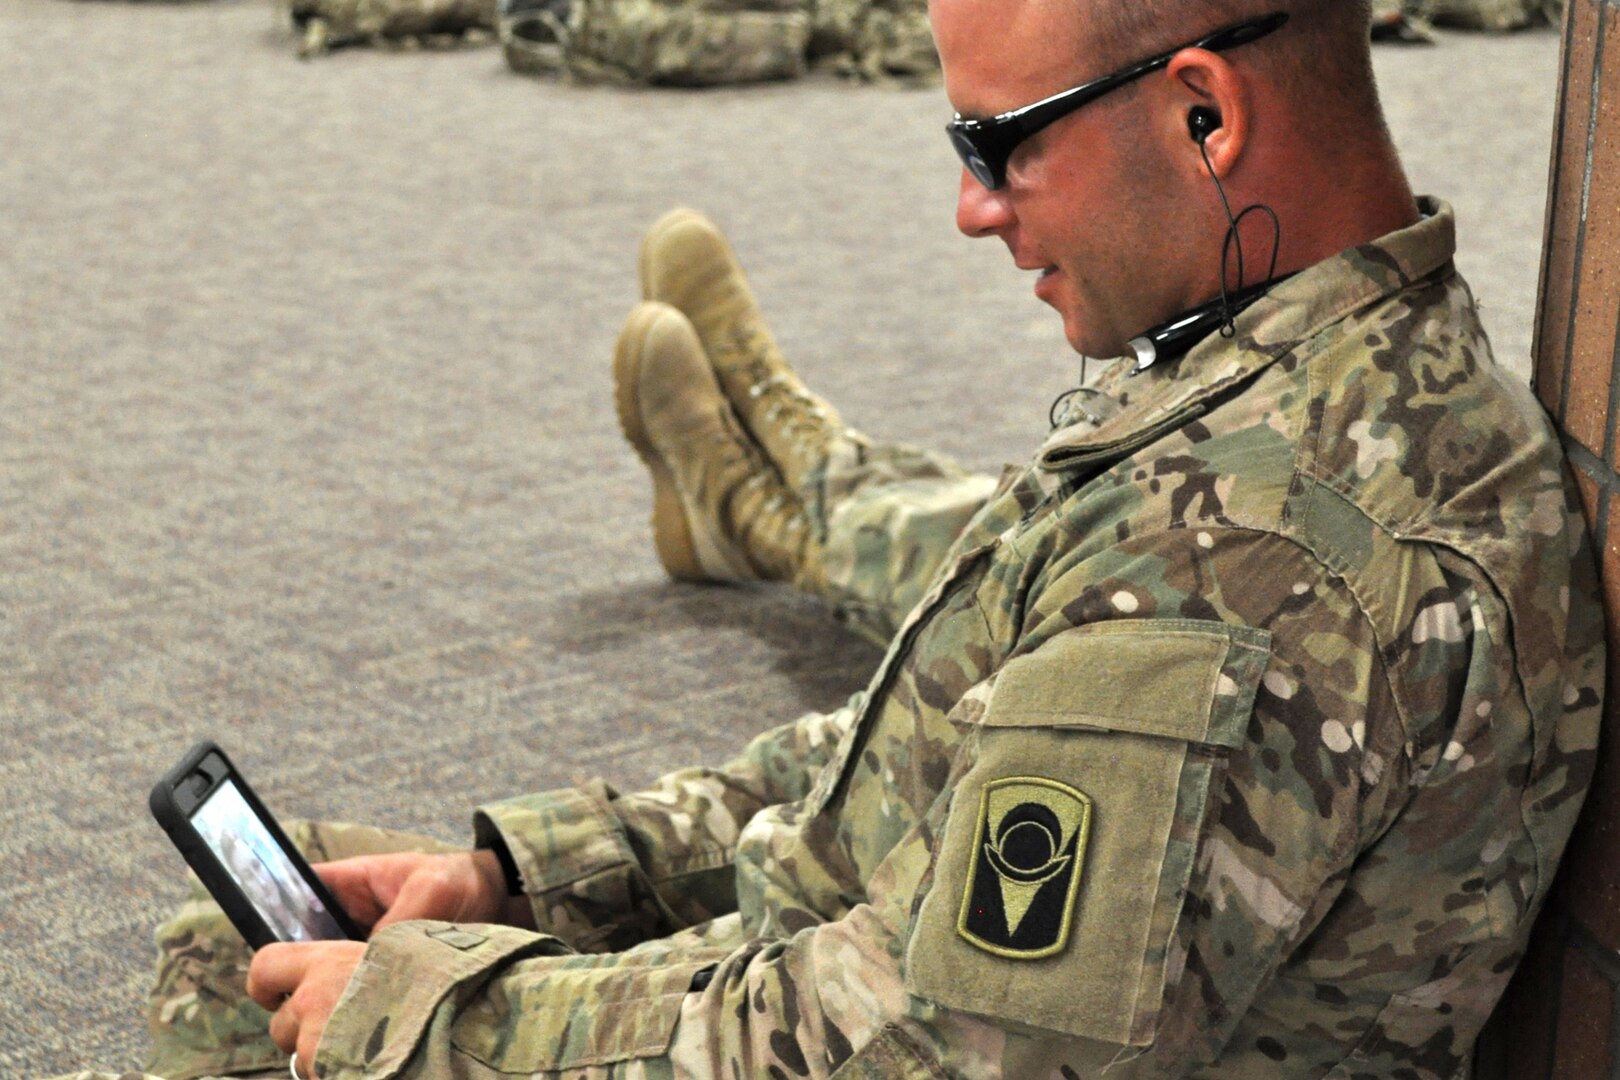 A soldier uses an  app on his cellphone.